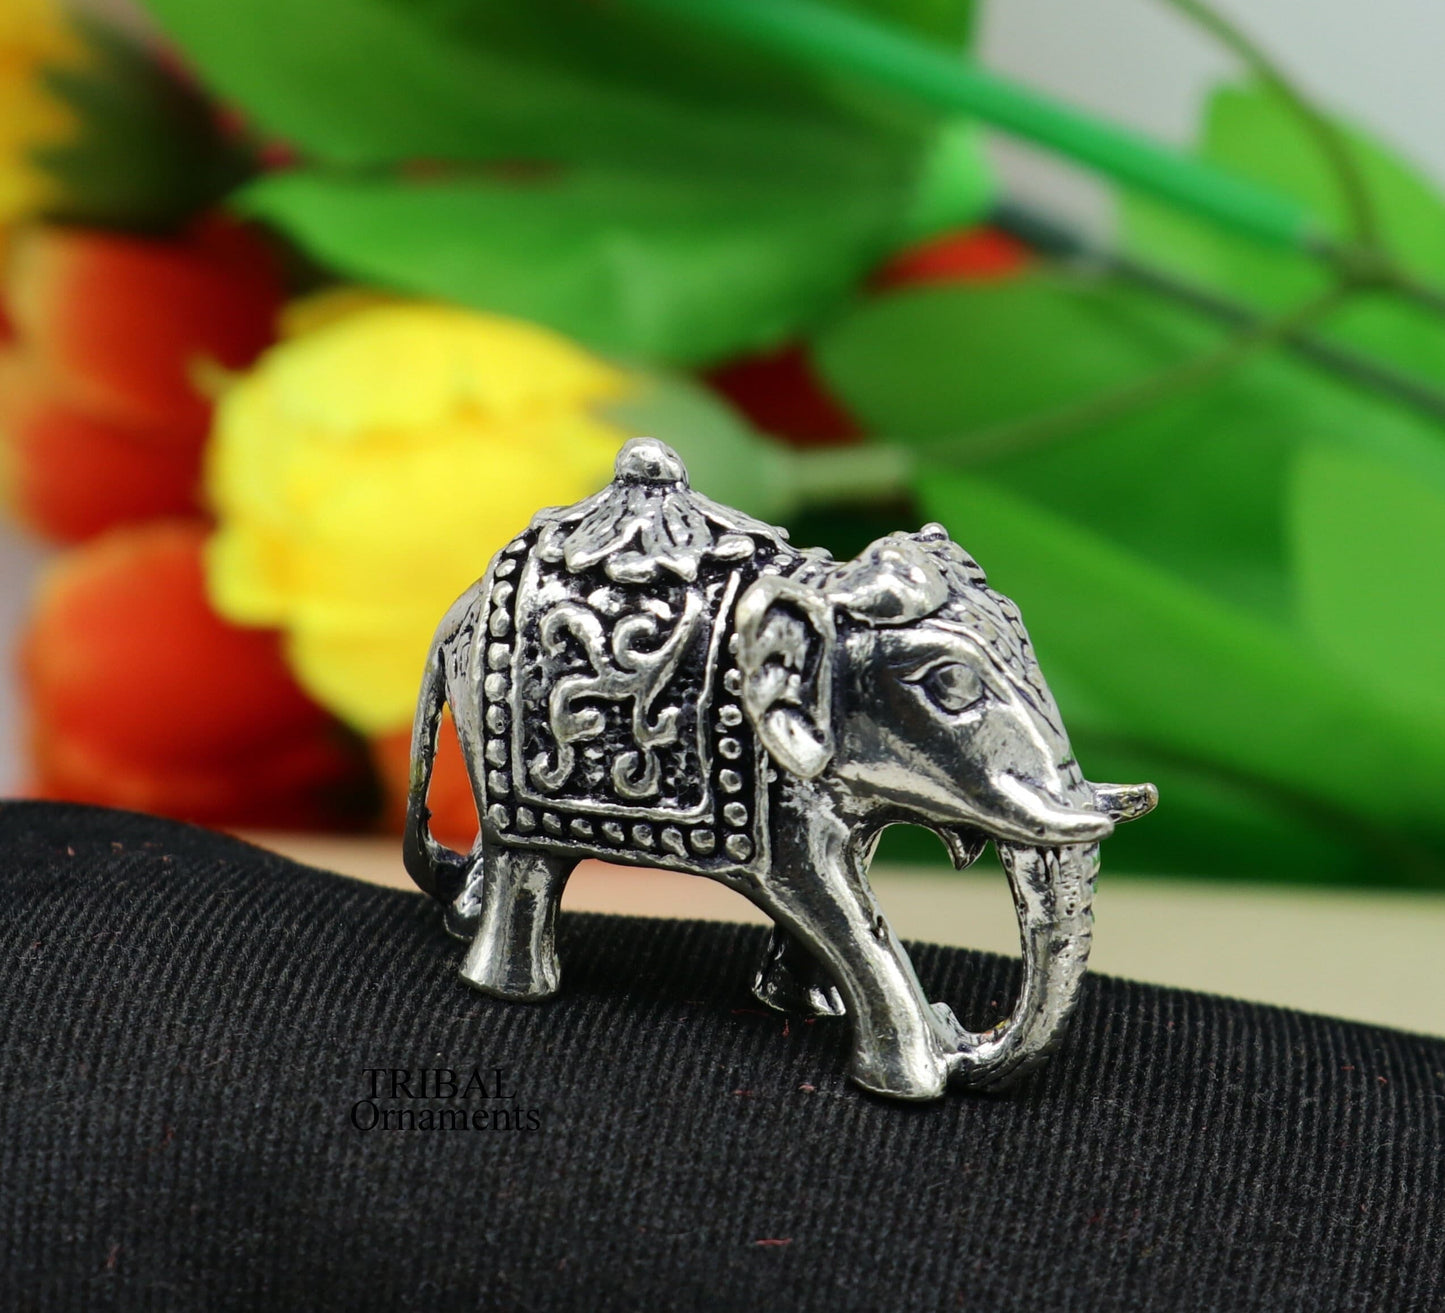 Solid 925 Sterling silver Kandrai work floral design customized Elephant statue, puja article figurine for wealth and prosperity art498 - TRIBAL ORNAMENTS